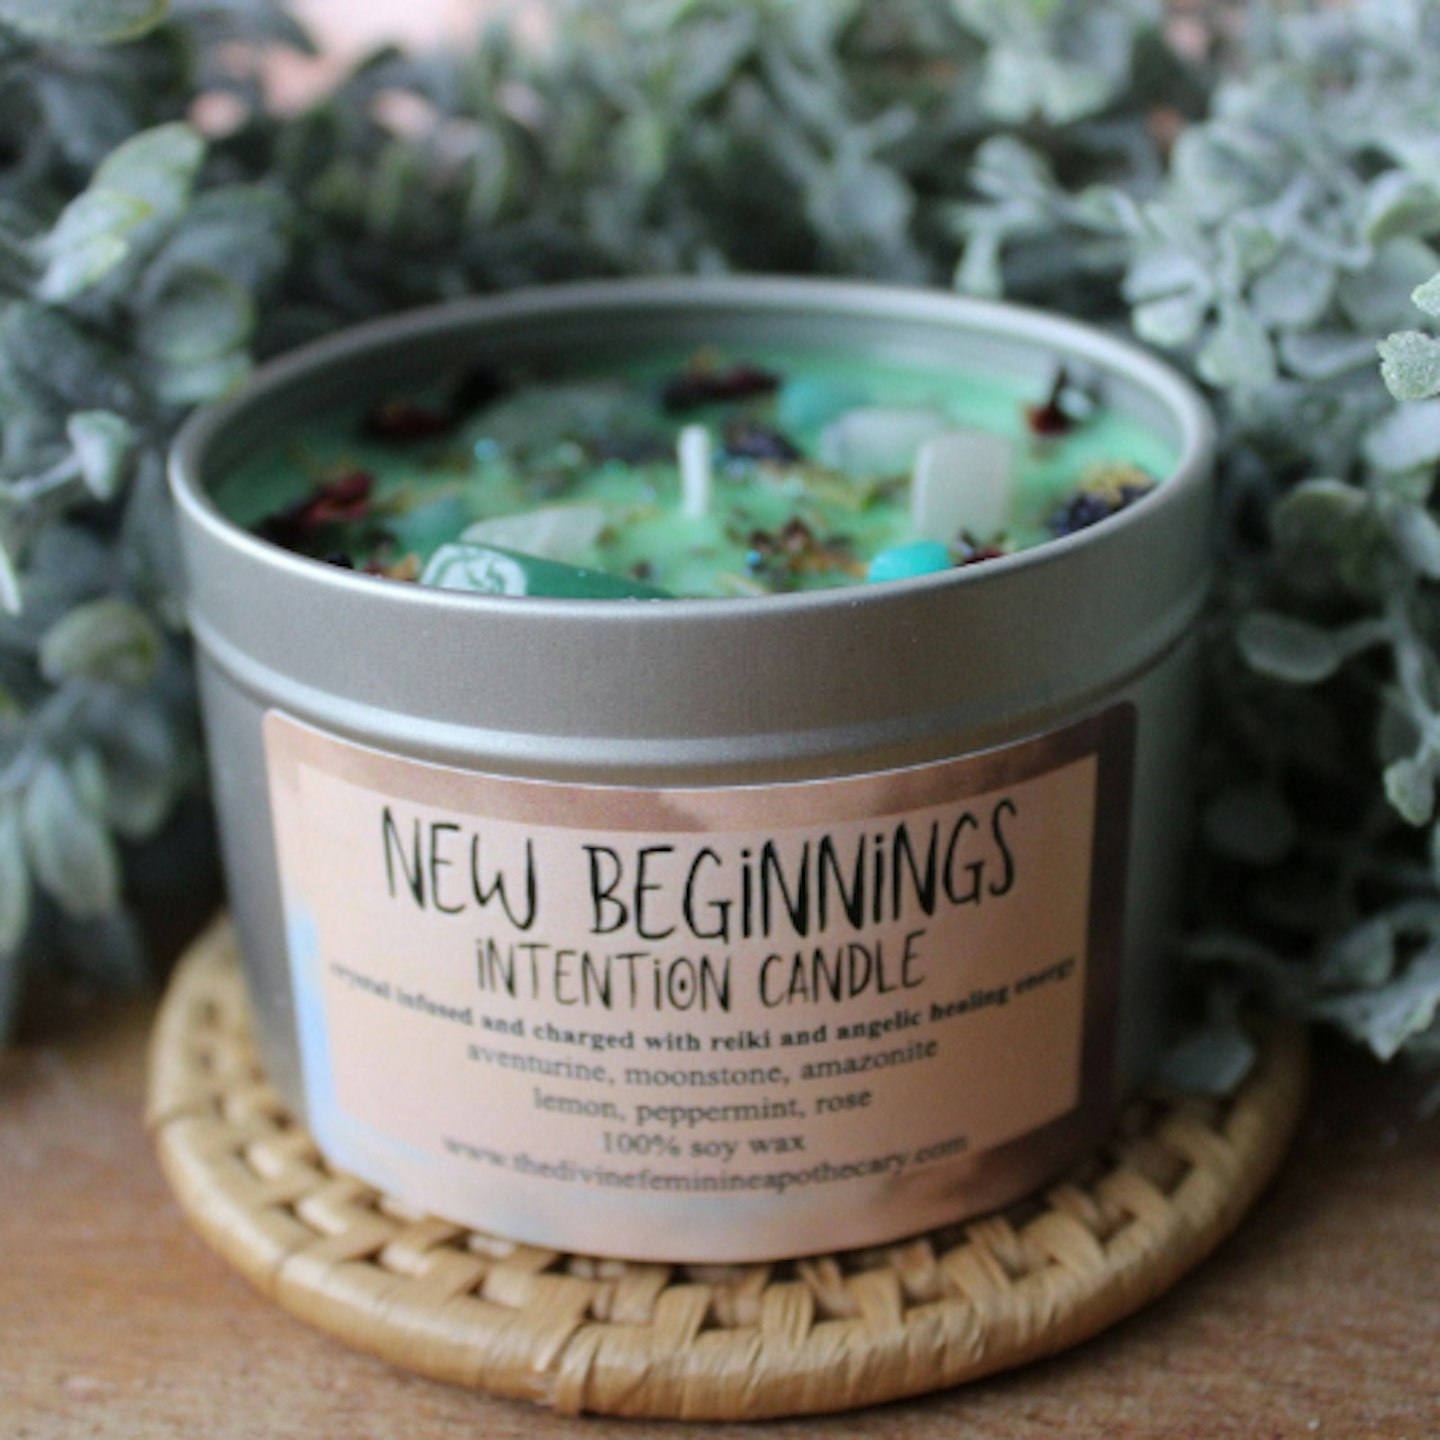 Thedfapothecary new beginnings intention candle